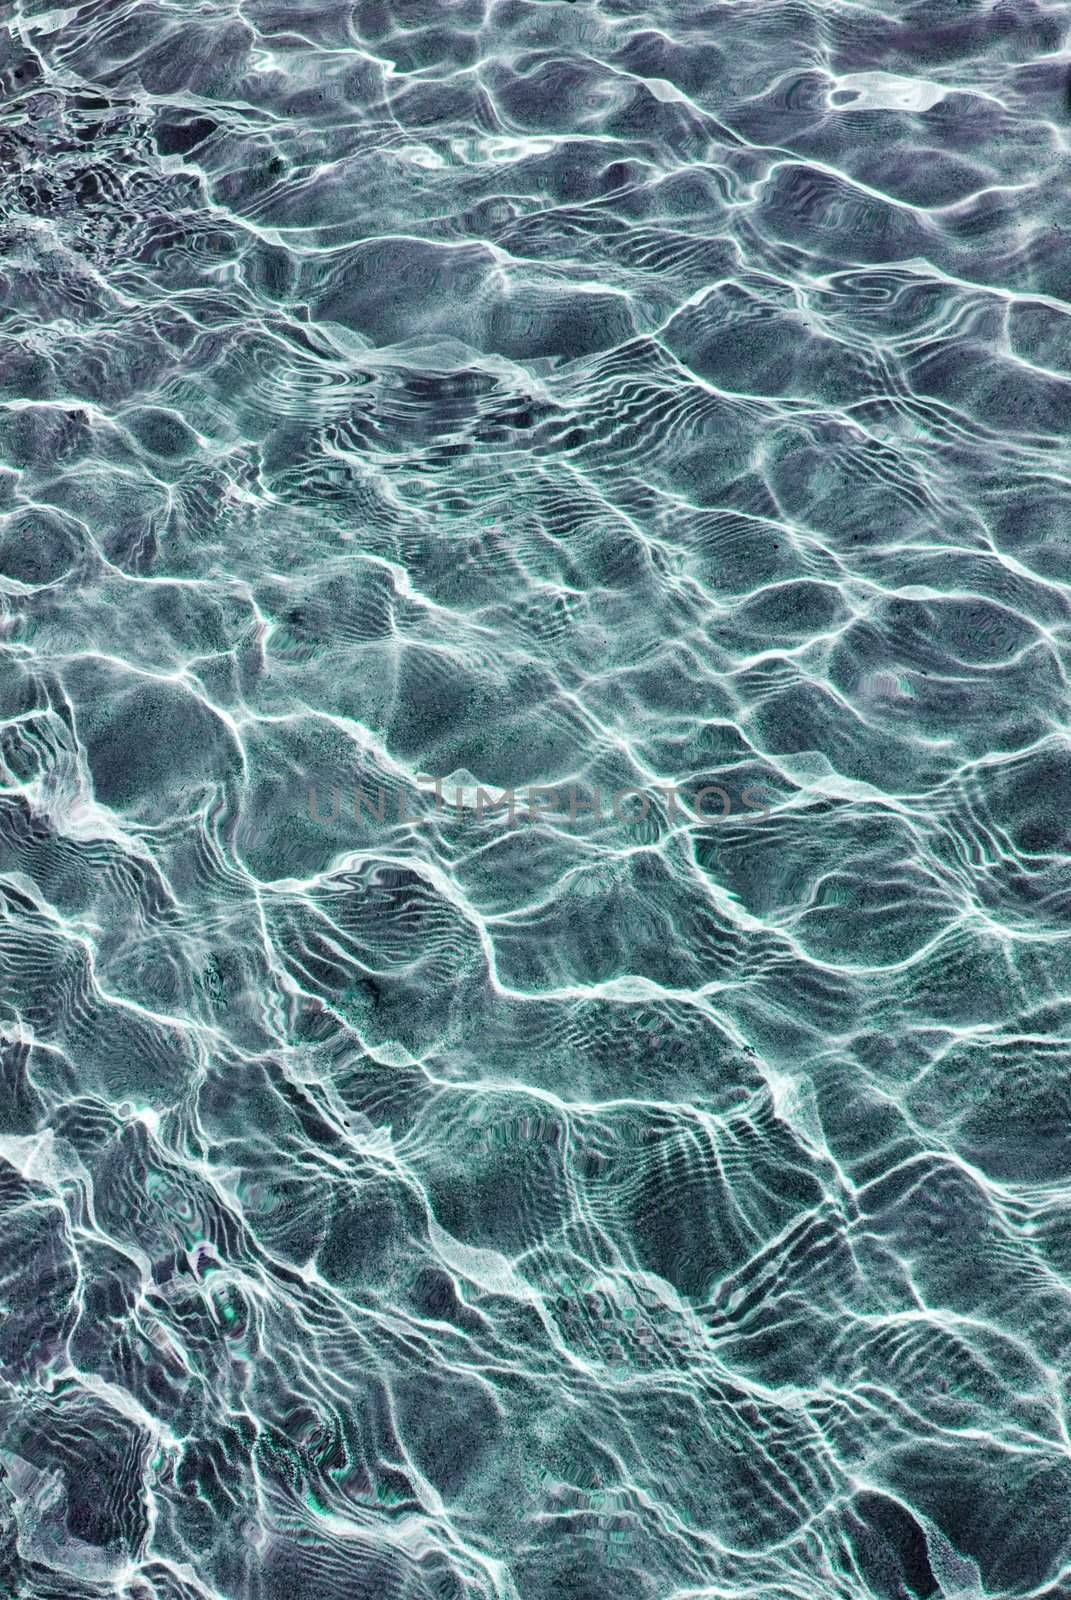 interference patterns formed by surface waves on a pool